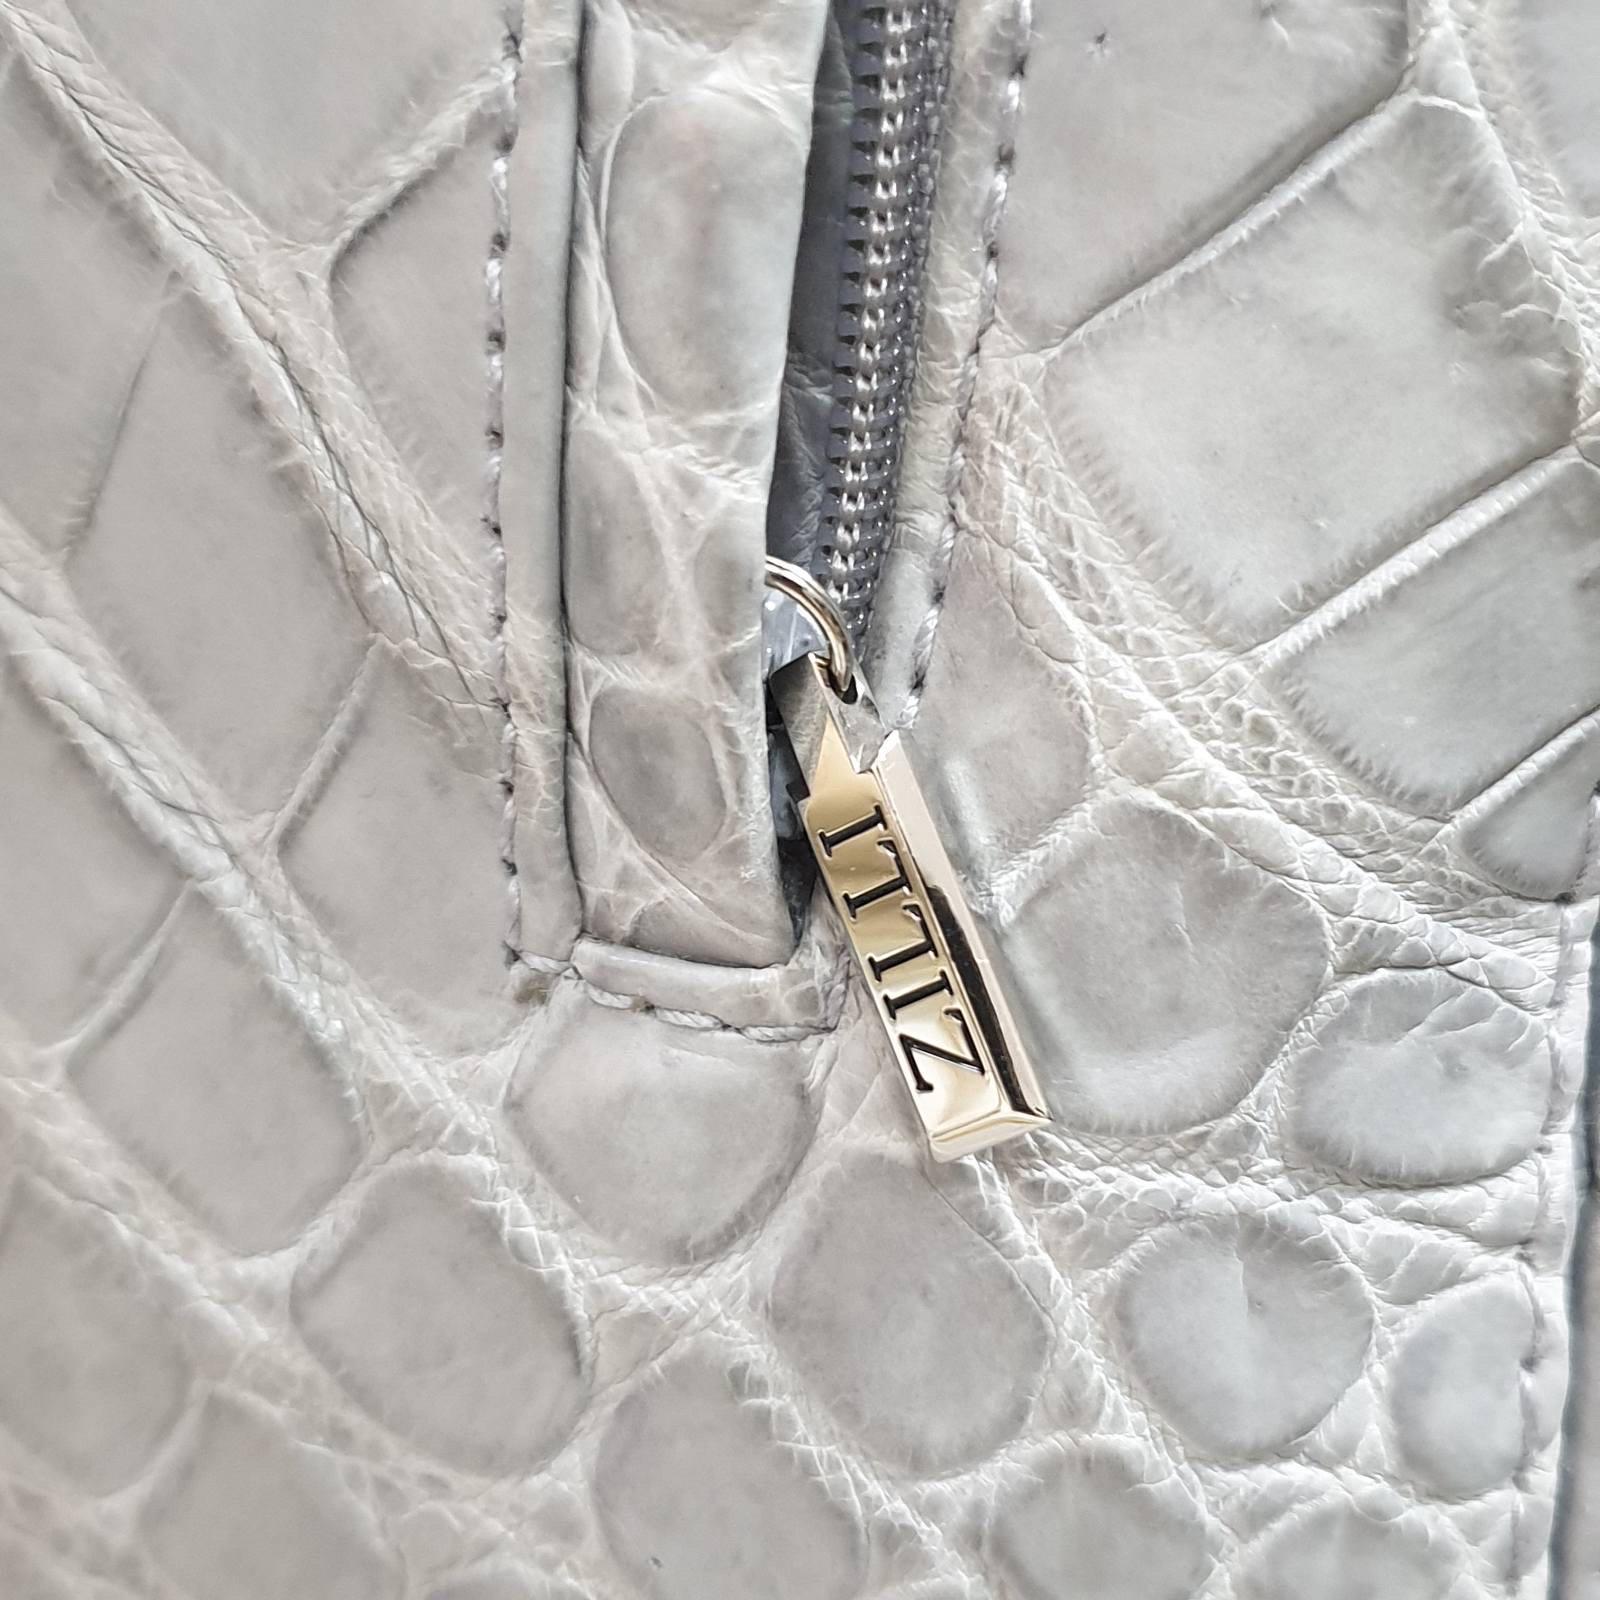 Retail price was 70 000 euros
Personalised jacket.
Name tag can be removed.
Individual order in Paris Zilli boutique
Very good condition.
Slight dirtiness seen on pics. Not very visible
Sz.40